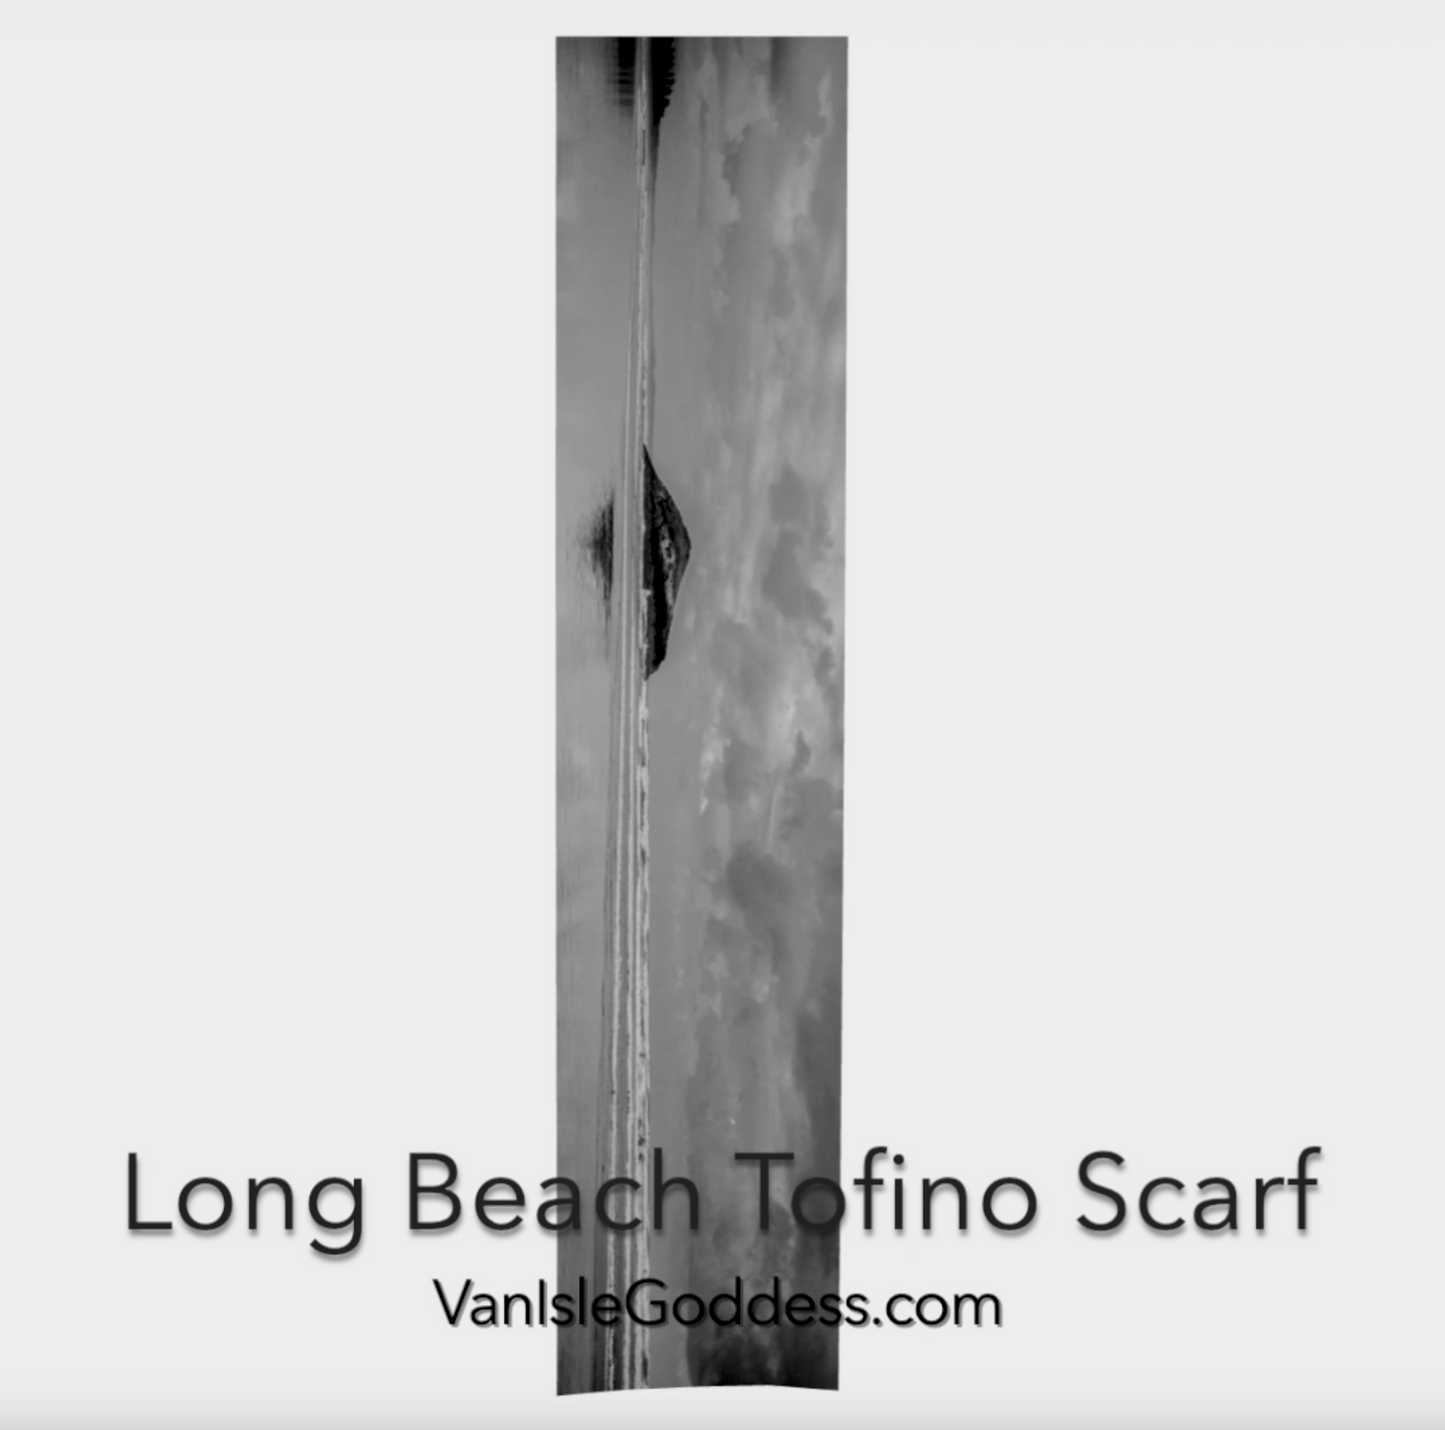 Long Beach long scarf it shown in its full length to show the entire image.